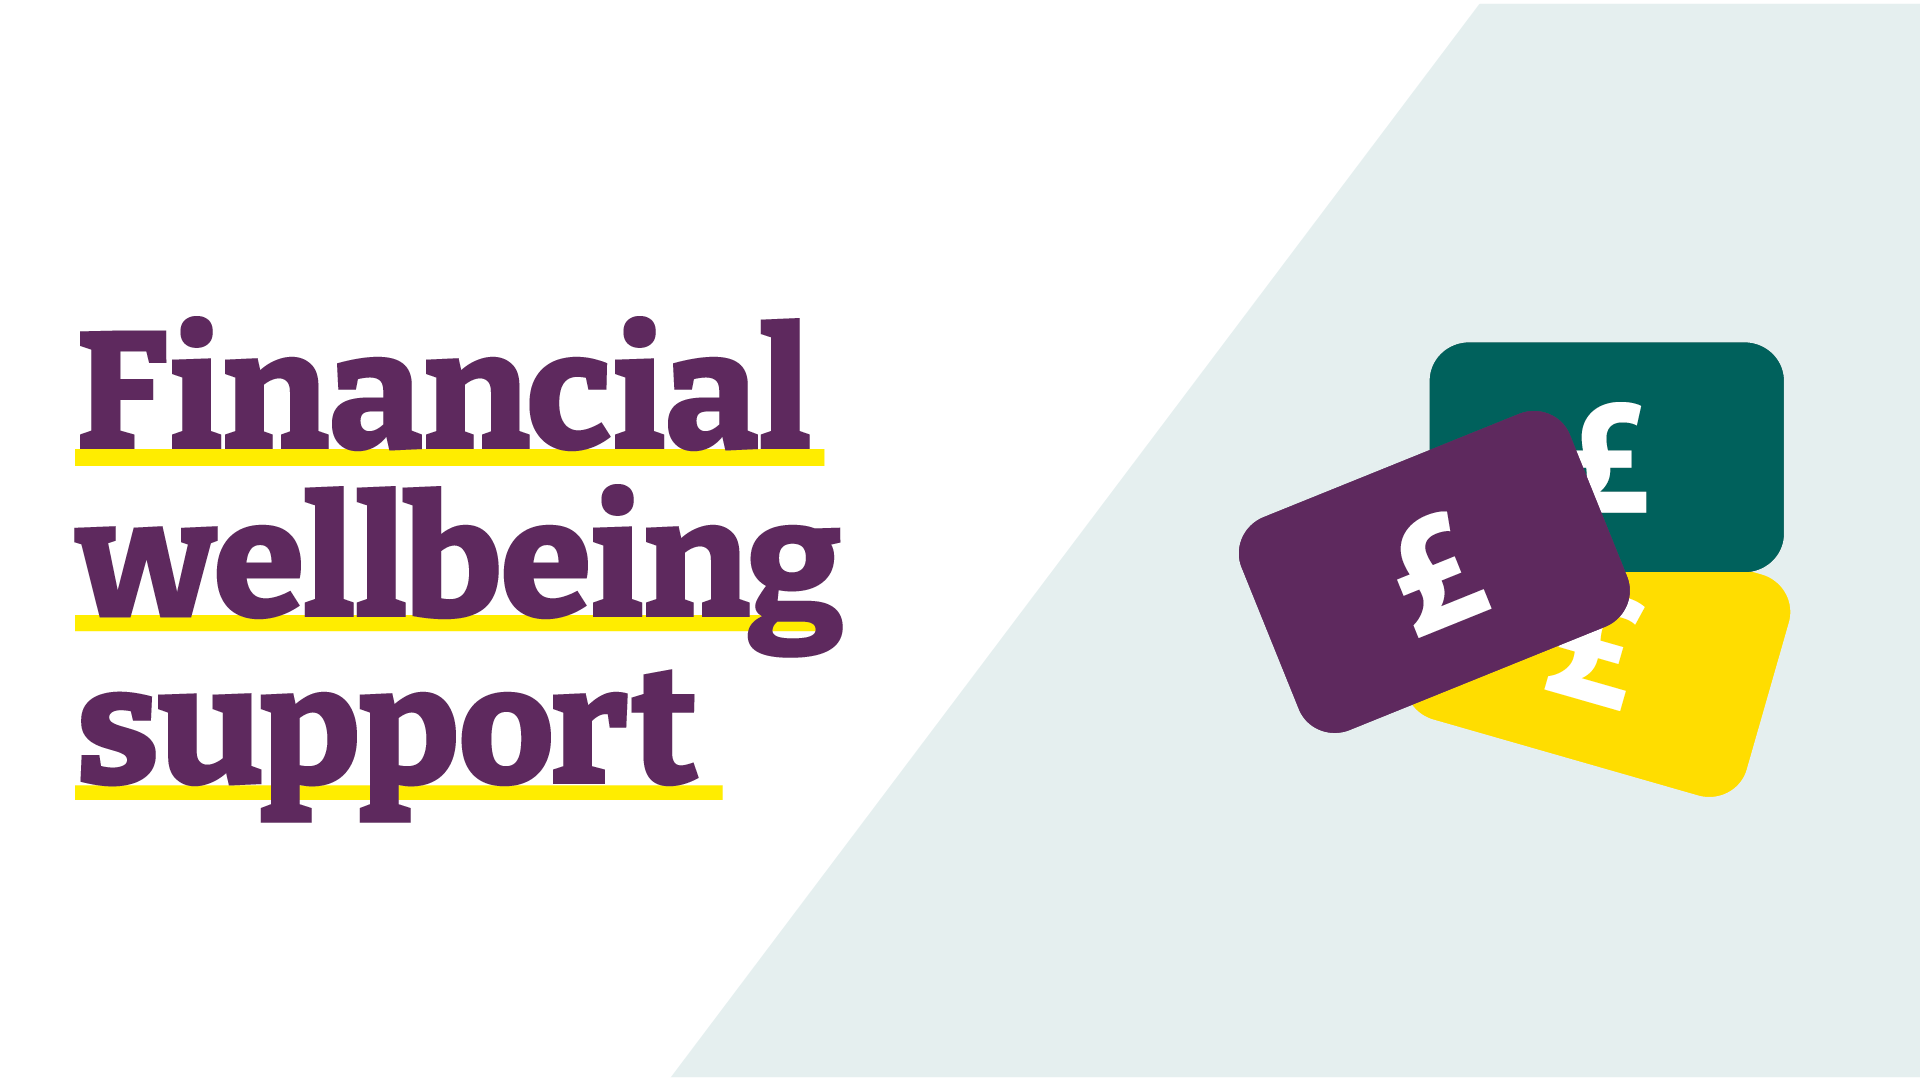 Financial wellbeing support